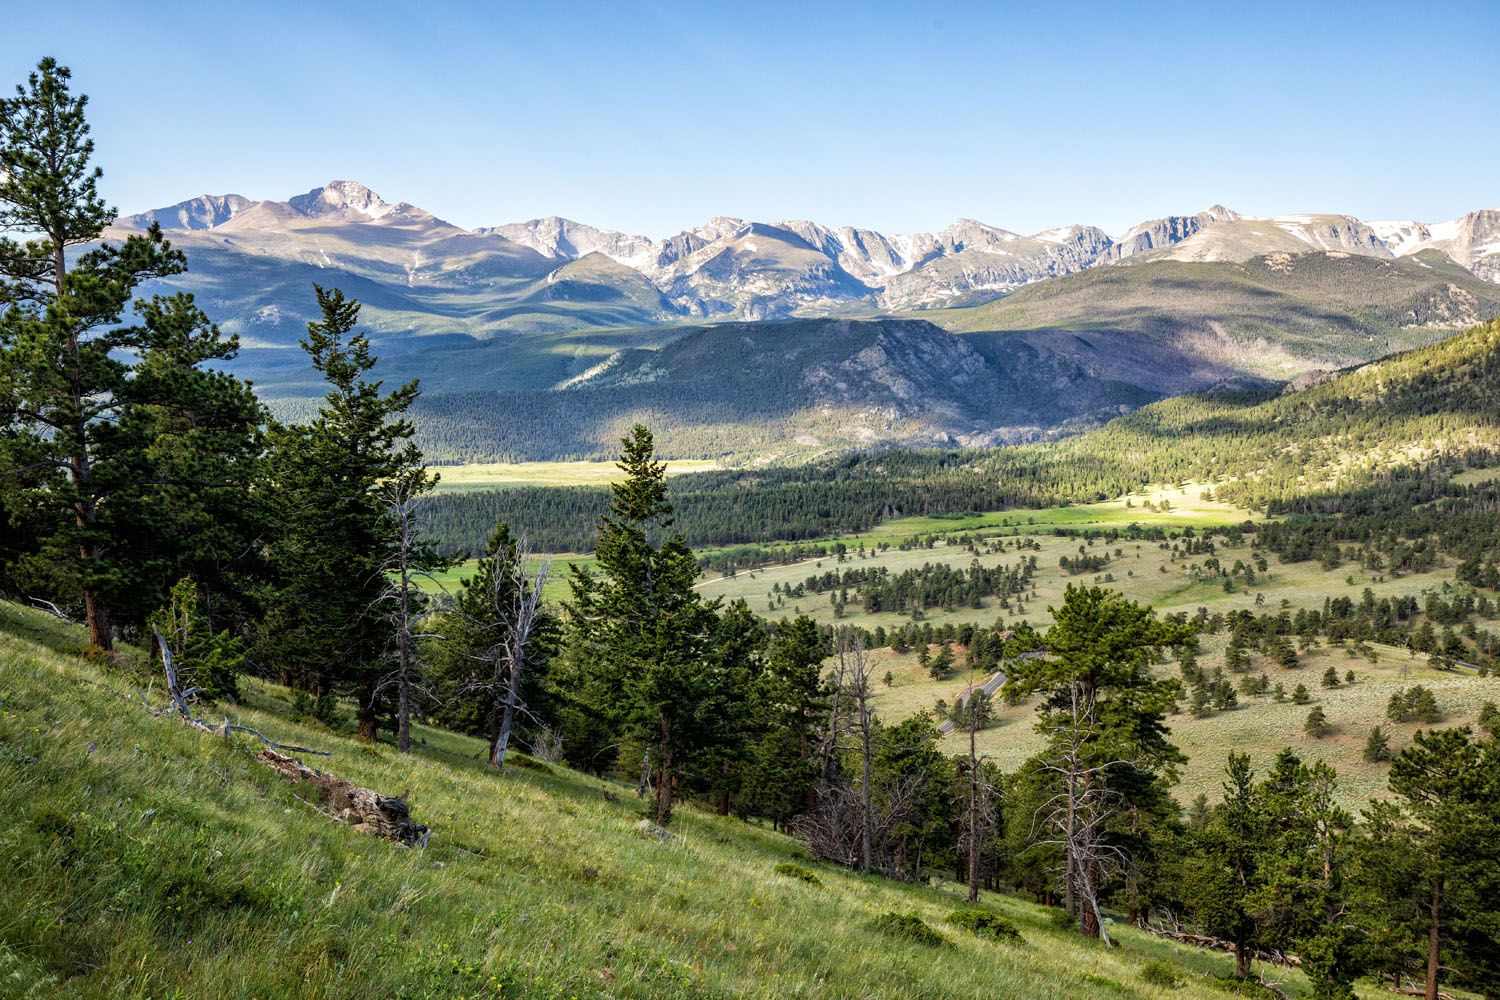 Moraine Park things to do in Rocky Mountain National Park